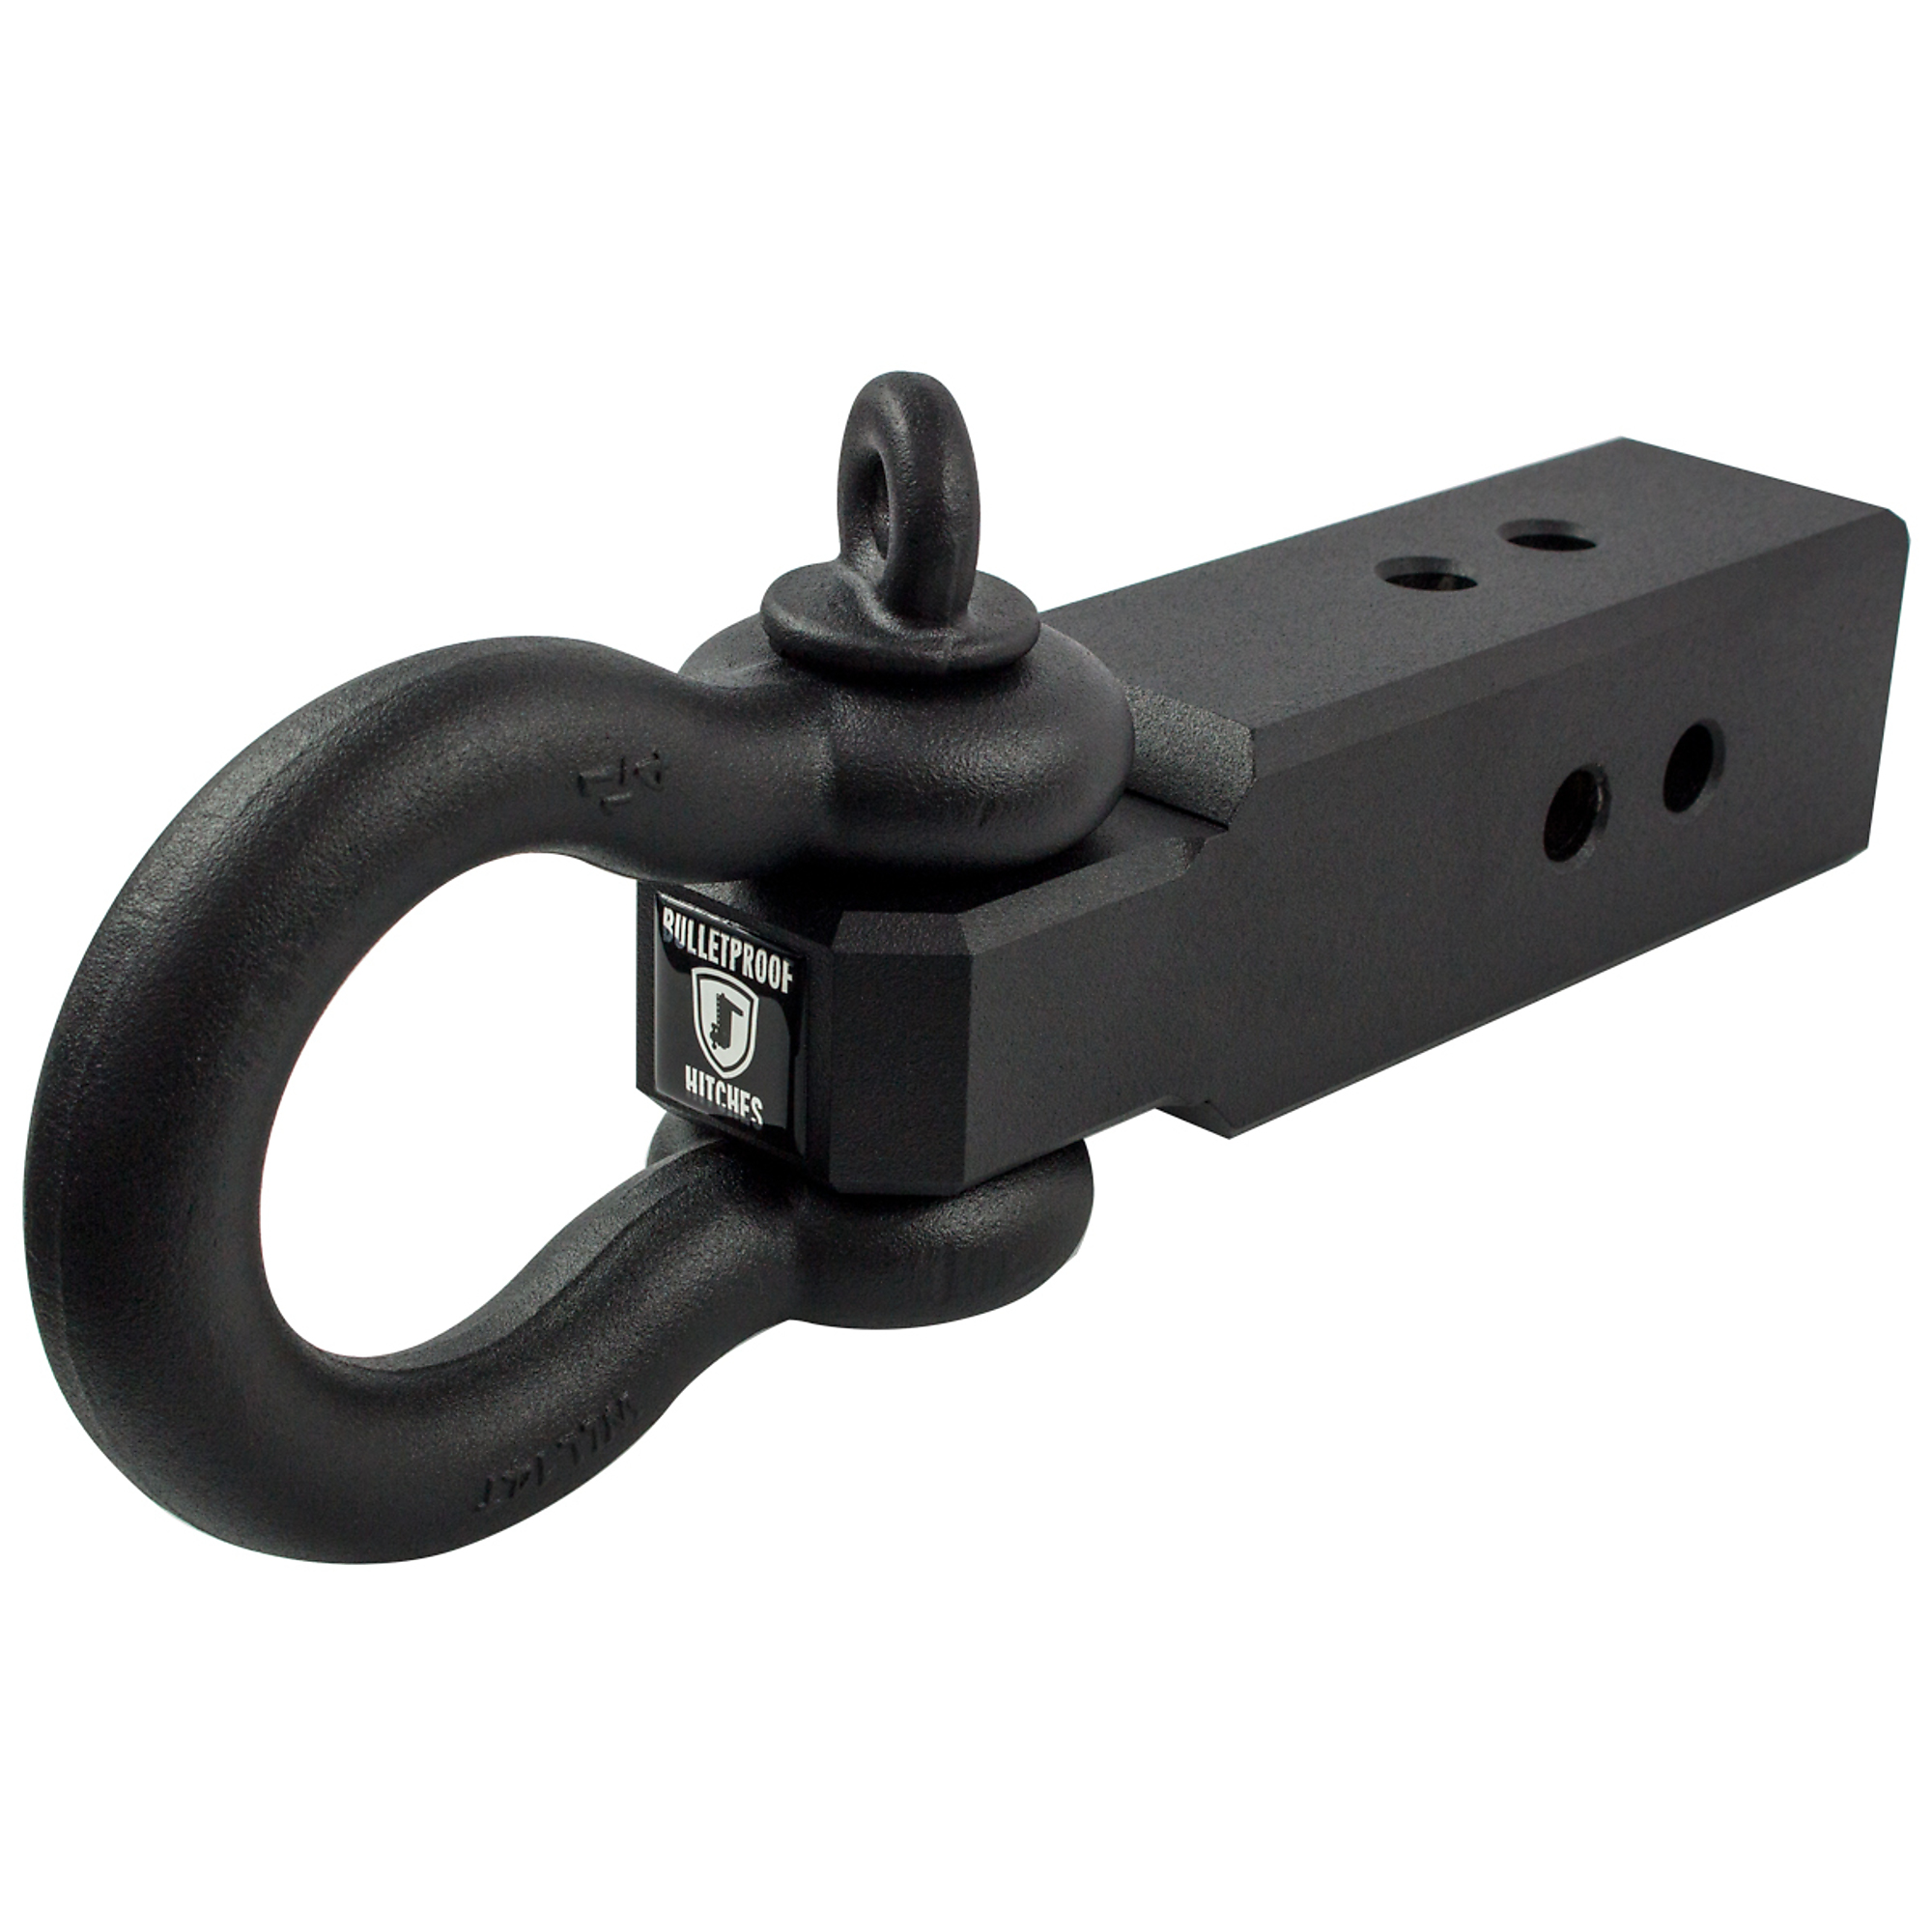 BulletProof Hitches, 3.0Inch EXTREME DUTY RECEIVER SHACKLE, Fits Receiver Size 3 in, Model ED30SHACKLE